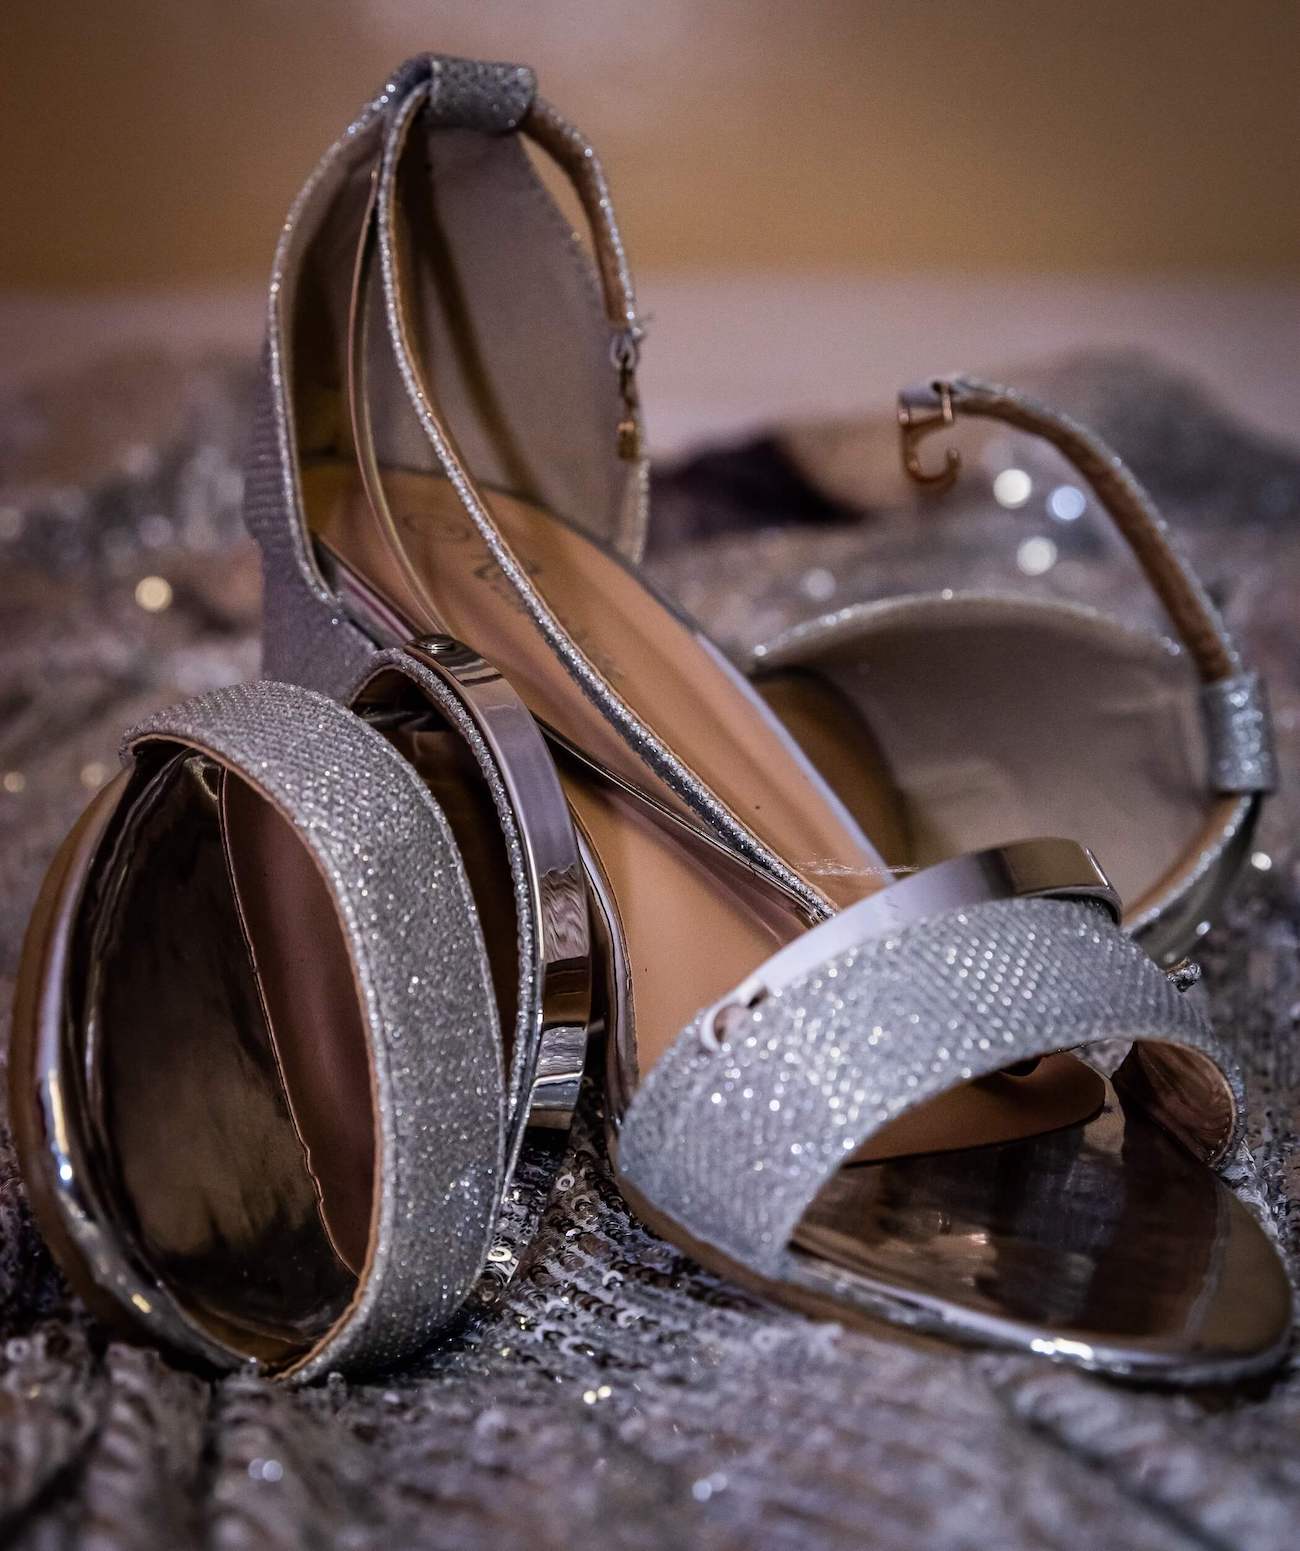 Classic silver heels are great for a Cinderella style ball gown